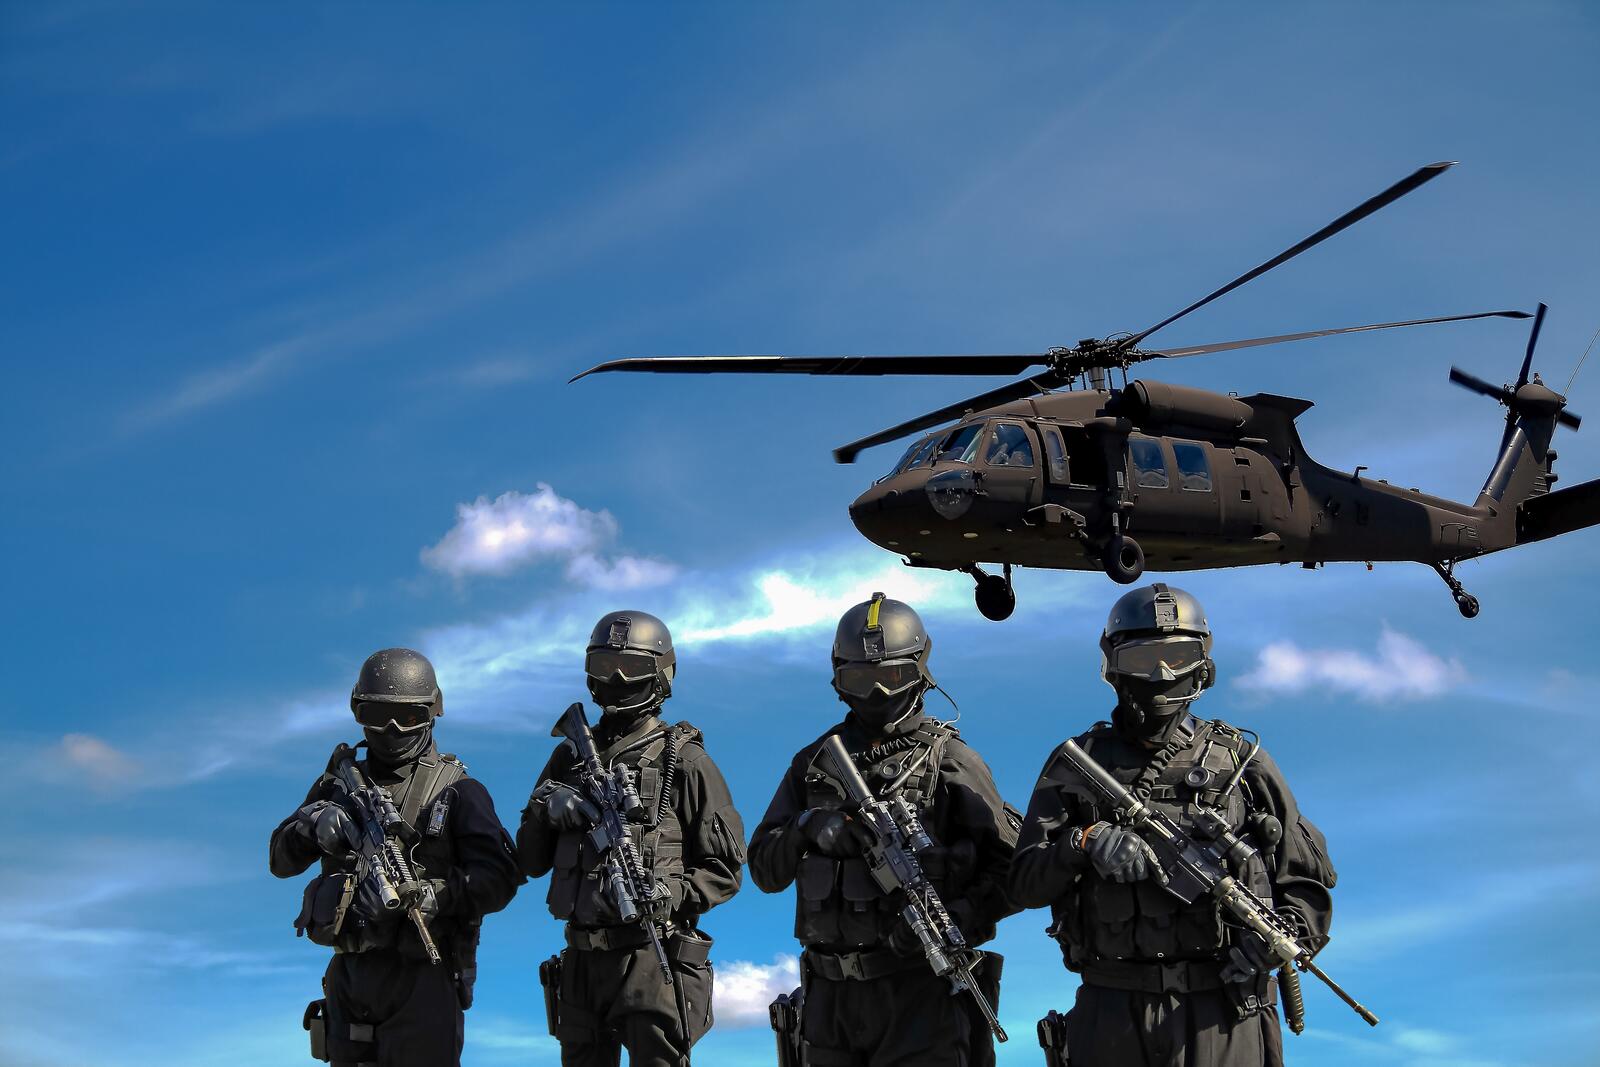 Wallpapers airplanes military army on the desktop